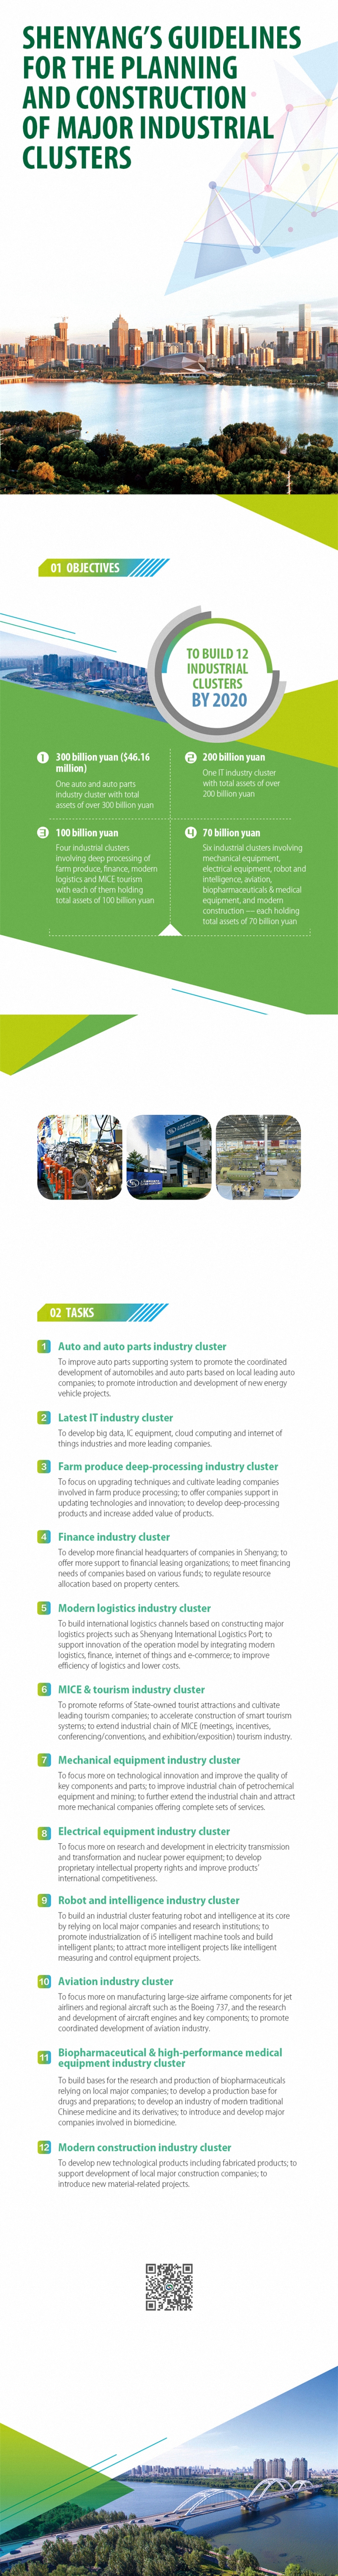 Infographic: Shenyang's Guidelines for the Planning and Construction of Major Industrial Clusters